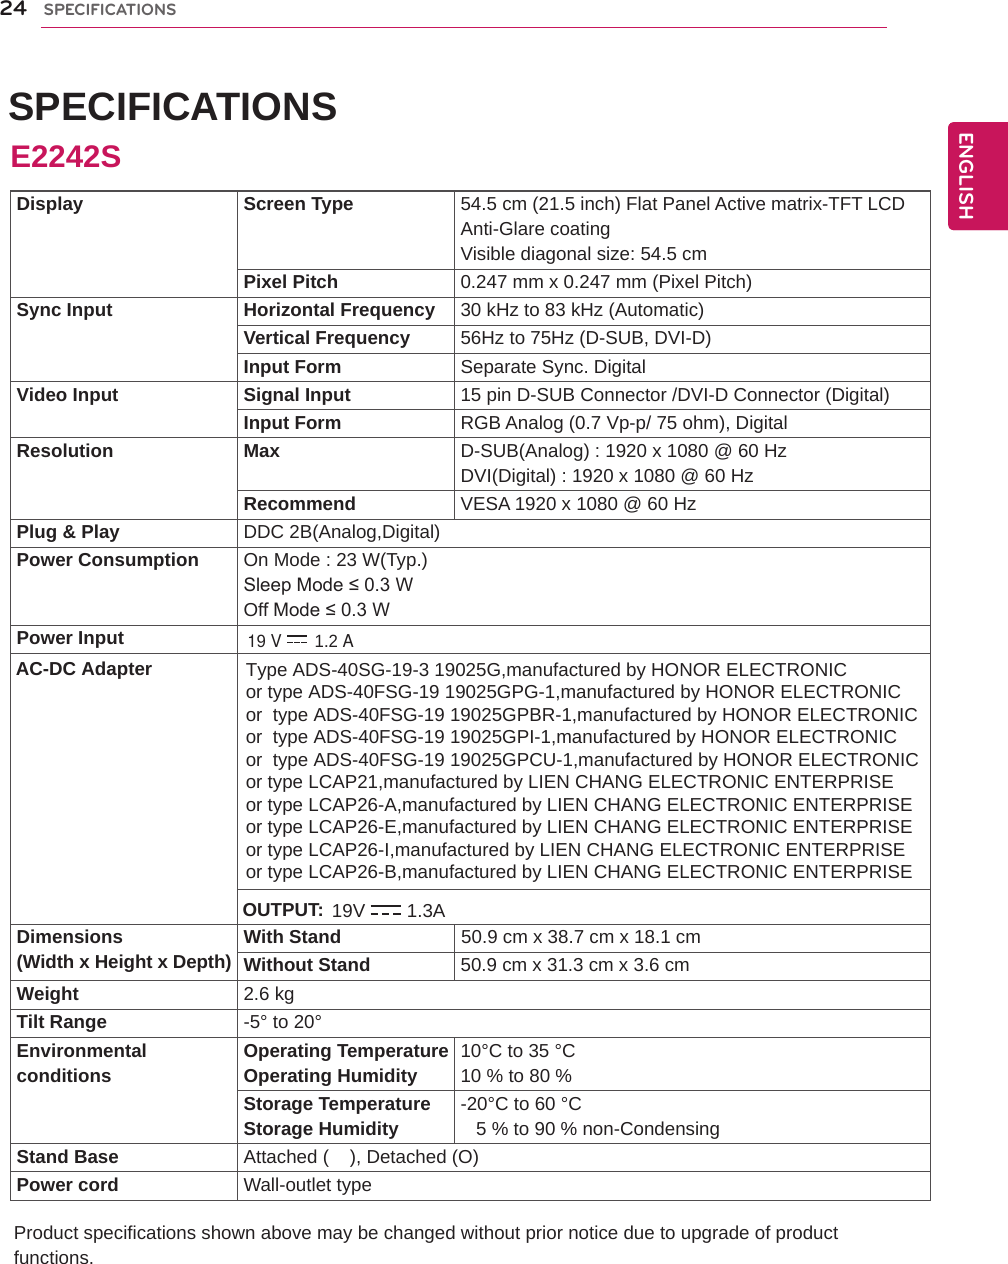 ENGENGLISH SPECIFICATIONS Product specifications shown above may be changed without prior notice due to upgrade of product functions.24SPECIFICATIONSDisplay Screen Type 54.5 cm (21.5 inch) Flat Panel Active matrix-TFT LCDAnti-Glare coatingVisible diagonal size: 54.5 cmPixel Pitch 0.247 mm x 0.247 mm (Pixel Pitch)Sync Input Horizontal Frequency 30 kHz to 83 kHz (Automatic)Vertical Frequency 56Hz to 75Hz (D-SUB, DVI-D)Input Form Separate Sync. DigitalVideo Input Signal Input 15 pin D-SUB Connector /DVI-D Connector (Digital)Input Form RGB Analog (0.7 Vp-p/ 75 ohm), DigitalResolution Max D-SUB(Analog) : 1920 x 1080 @ 60 HzDVI(Digital) : 1920 x 1080 @ 60 HzRecommend VESA 1920 x 1080 @ 60 HzPlug &amp; Play DDC 2B(Analog,Digital)Power Consumption On Mode : 23 W(Typ.)Sleep Mode ≤ 0.3 W Off Mode ≤ 0.3 W Power InputDimensions(Width x Height x Depth) With Stand                       50.9 cm x 38.7 cm x 18.1 cmWithout Stand 50.9 cm x 31.3 cm x 3.6 cmWeight 2.6 kgTilt Range -5° to 20°Environmentalconditions Operating TemperatureOperating Humidity 10°C to 35 °C10 % to 80 % Storage TemperatureStorage Humidity -20°C to 60 °C   5 % to 90 % non-CondensingStand Base Attached (    ), Detached (O)Power cord Wall-outlet typeE2242S19 V 1.2 A AC-DC Adapter Type ADS-40SG-19-3 19025G,manufactured by HONOR ELECTRONICor type ADS-40FSG-19 19025GPG-1,manufactured by HONOR ELECTRONICor  type ADS-40FSG-19 19025GPBR-1,manufactured by HONOR ELECTRONICor  type ADS-40FSG-19 19025GPI-1,manufactured by HONOR ELECTRONICor  type ADS-40FSG-19 19025GPCU-1,manufactured by HONOR ELECTRONICor type LCAP21,manufactured by LIEN CHANG ELECTRONIC ENTERPRISEor type LCAP26-A,manufactured by LIEN CHANG ELECTRONIC ENTERPRISEor type LCAP26-E,manufactured by LIEN CHANG ELECTRONIC ENTERPRISEor type LCAP26-I,manufactured by LIEN CHANG ELECTRONIC ENTERPRISEor type LCAP26-B,manufactured by LIEN CHANG ELECTRONIC ENTERPRISE OUTPUT: 19V 1.3A